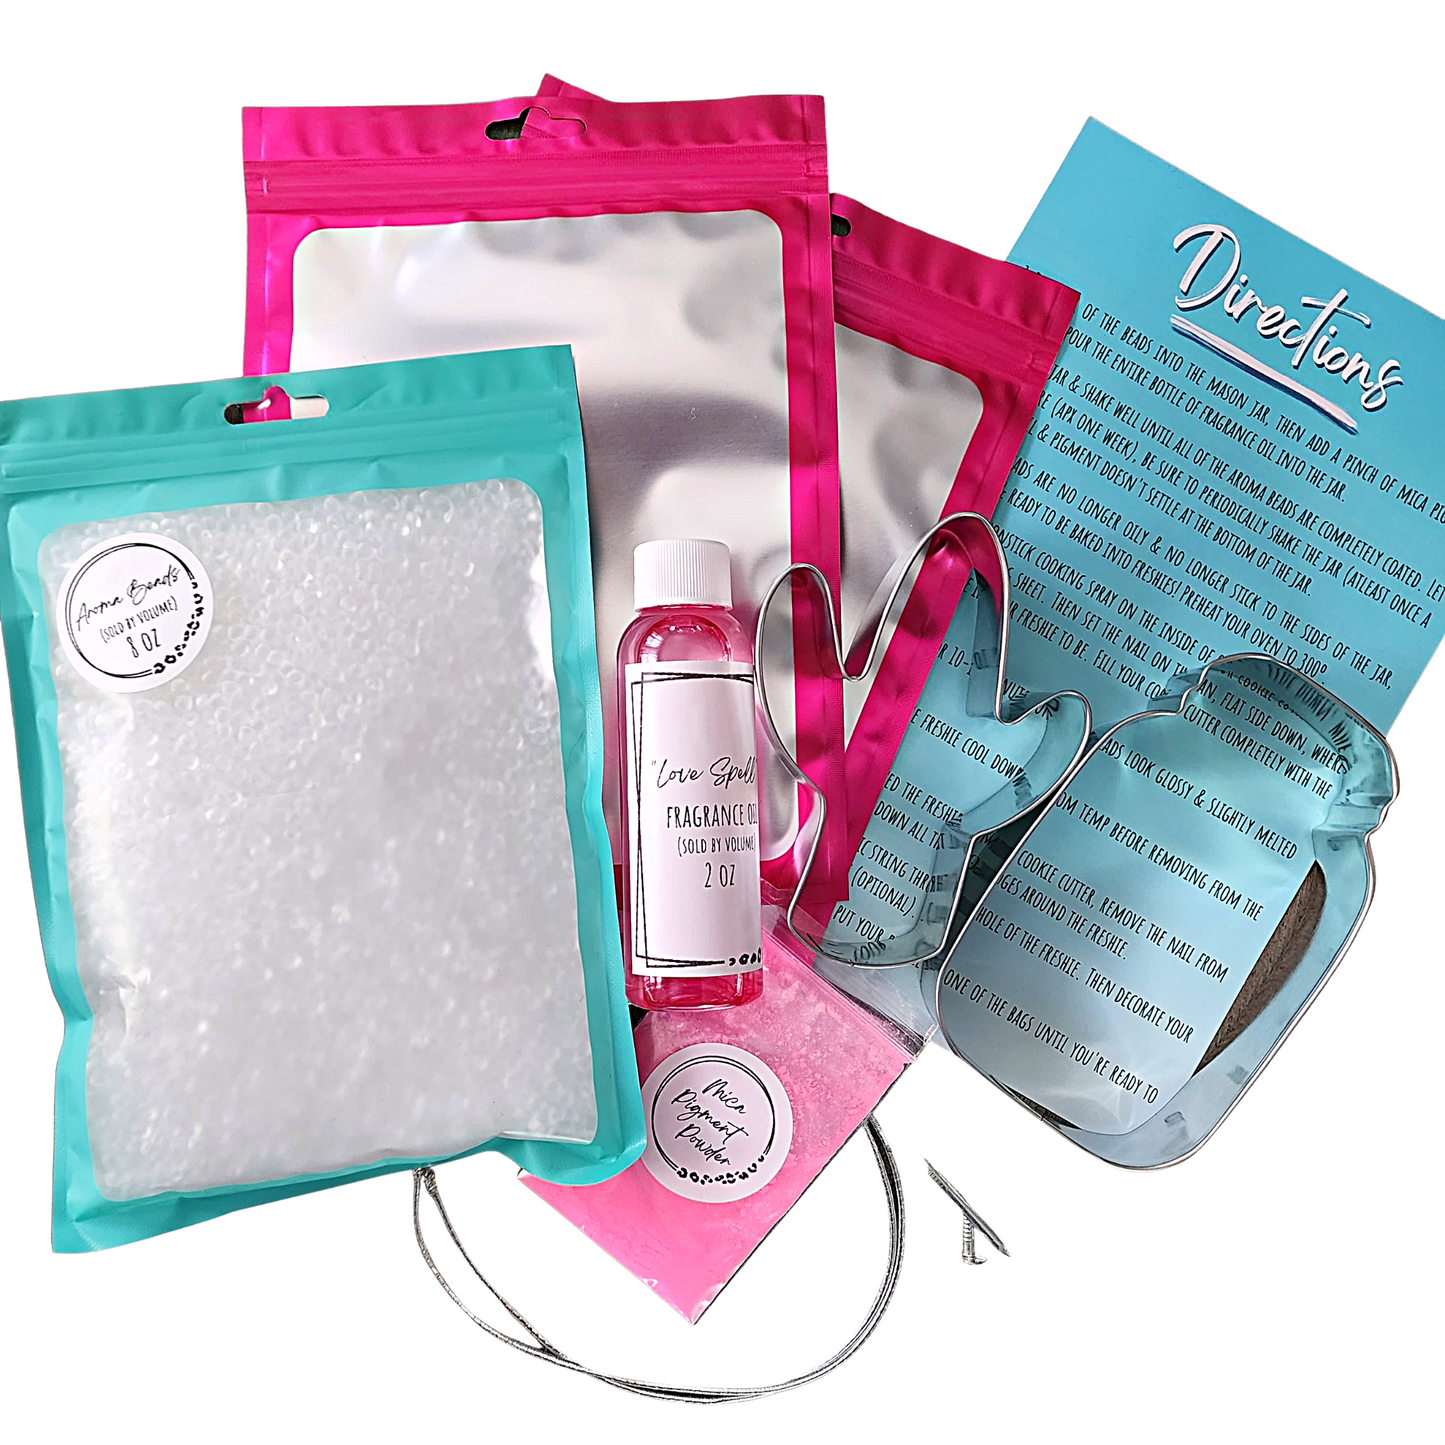 Small Unscented Aroma Beads Freshie Starter Kit (Makes 12-20